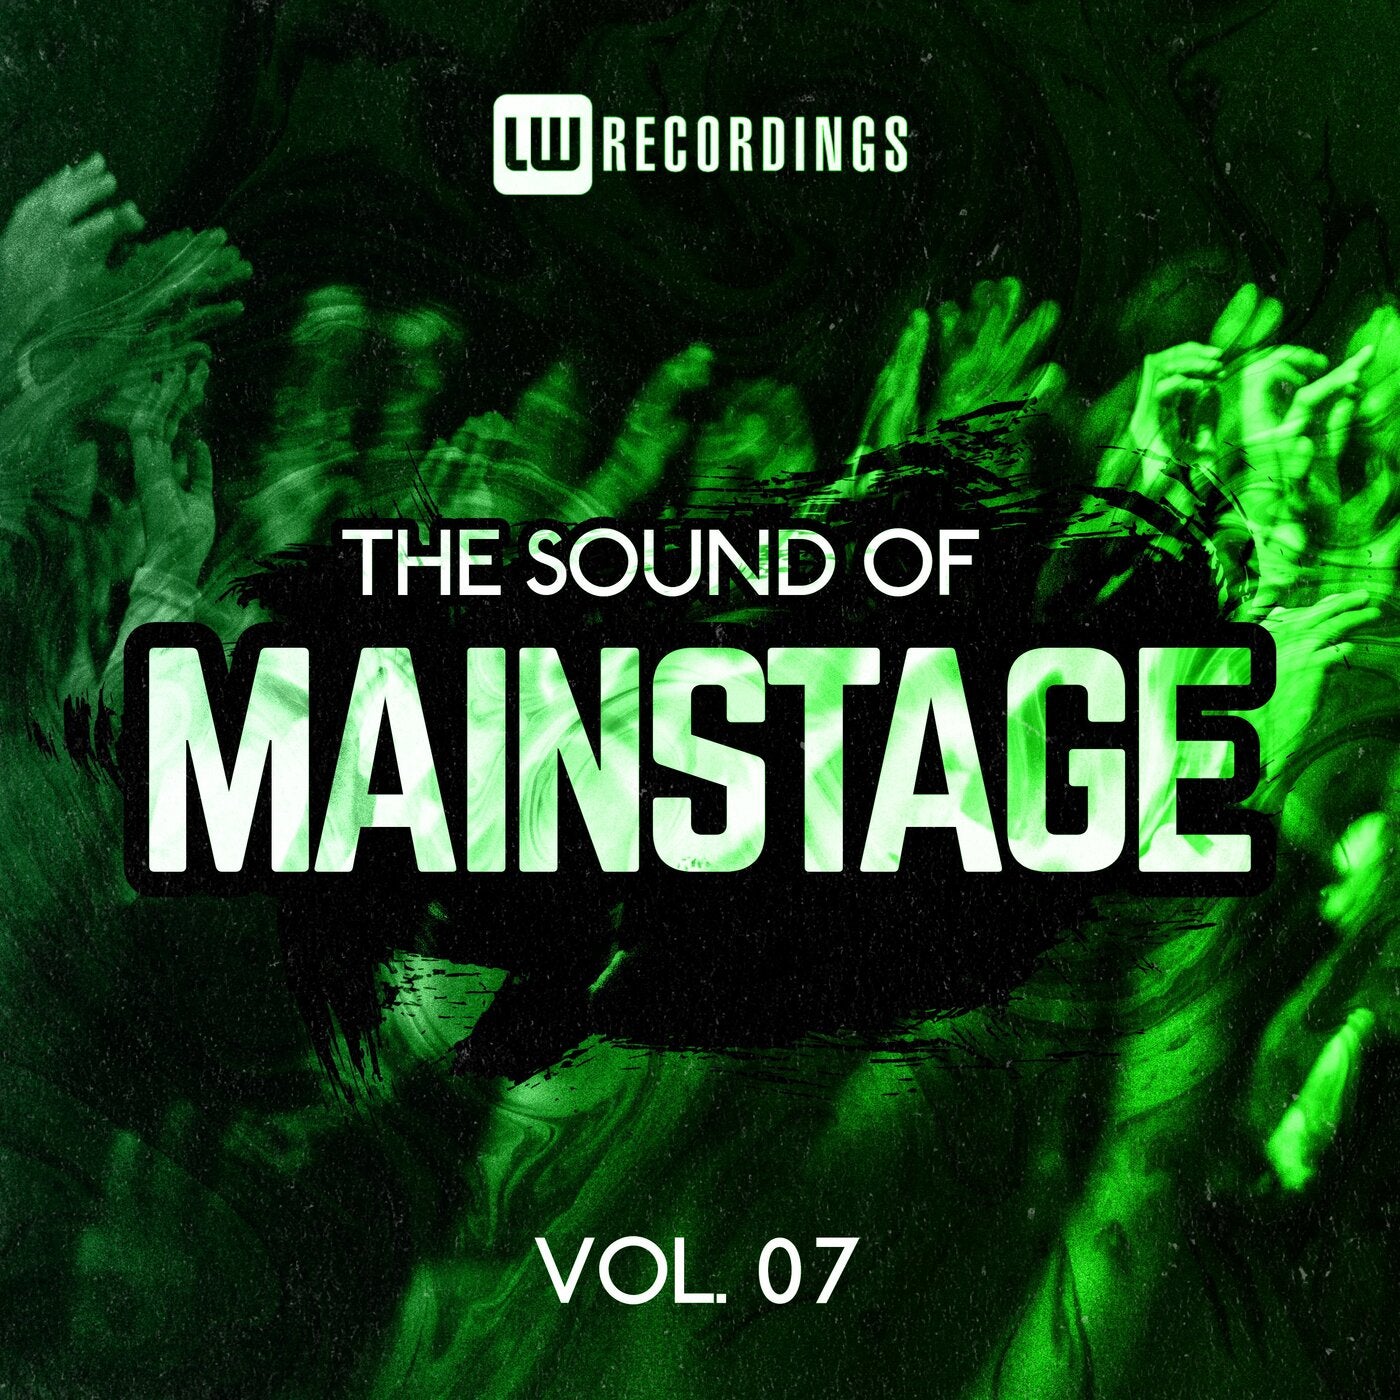 The Sound Of Mainstage, Vol. 07